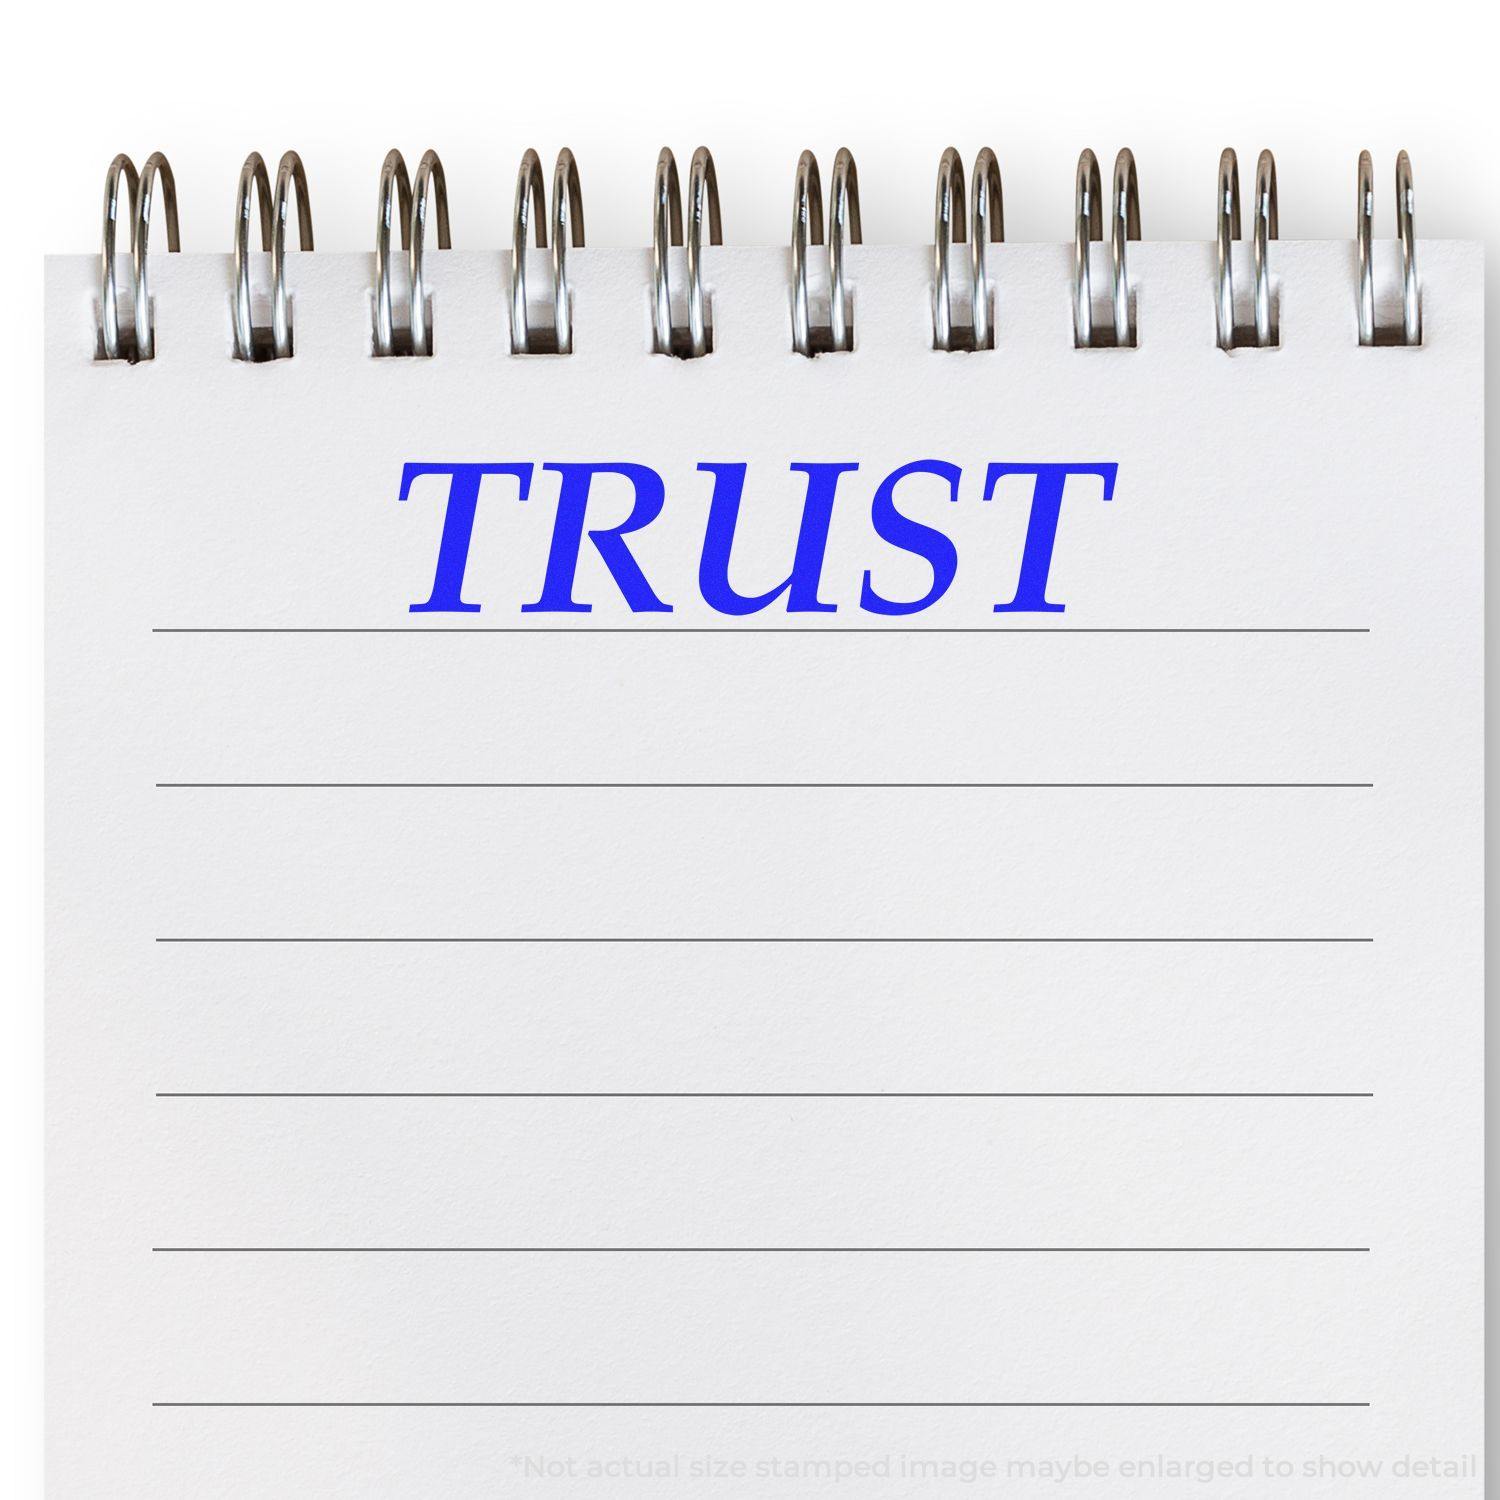 A stock office rubber stamp with a stamped image showing how the text "TRUST" in a large font is displayed after stamping.